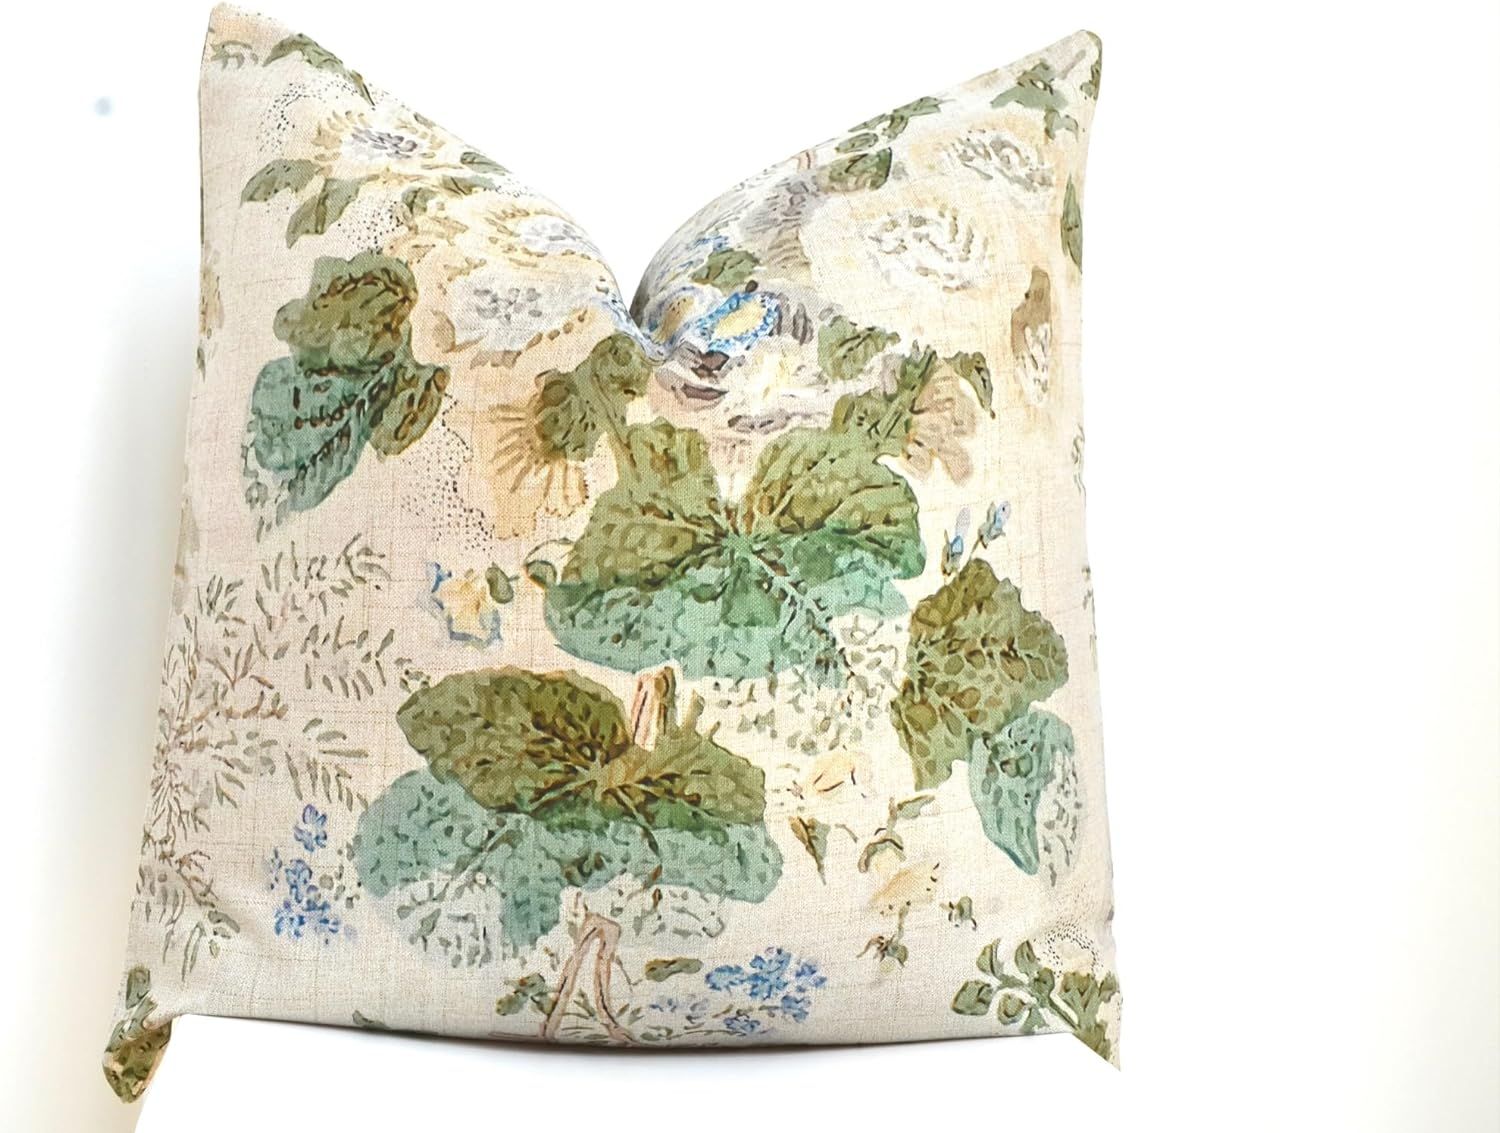 Decorative Nature Floral Leaf Print Pillow Cover in Ivory and Green for Home Decor/Design, Throw ... | Amazon (US)